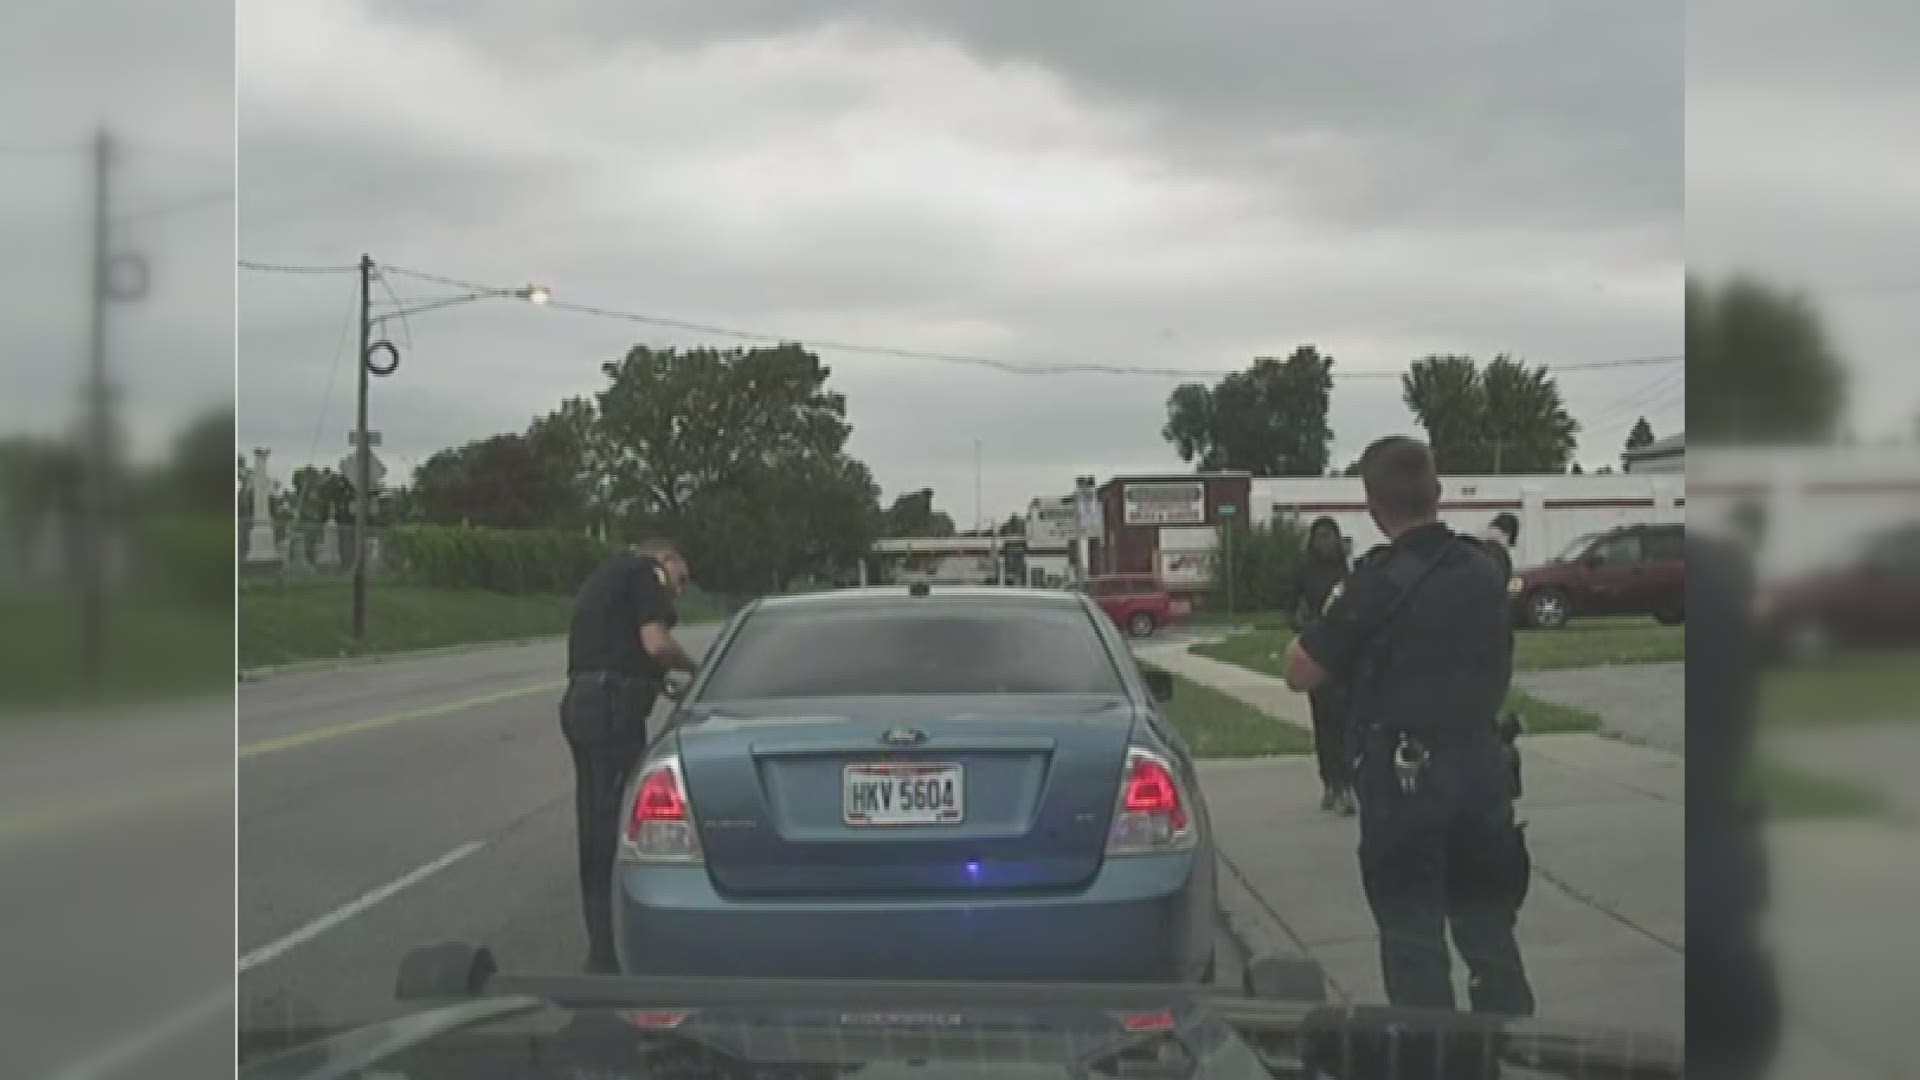 Toledo police released dashcam and surveillance footage of the traffic stop that went viral. *Disclaimer: this video includes use of explicit language.